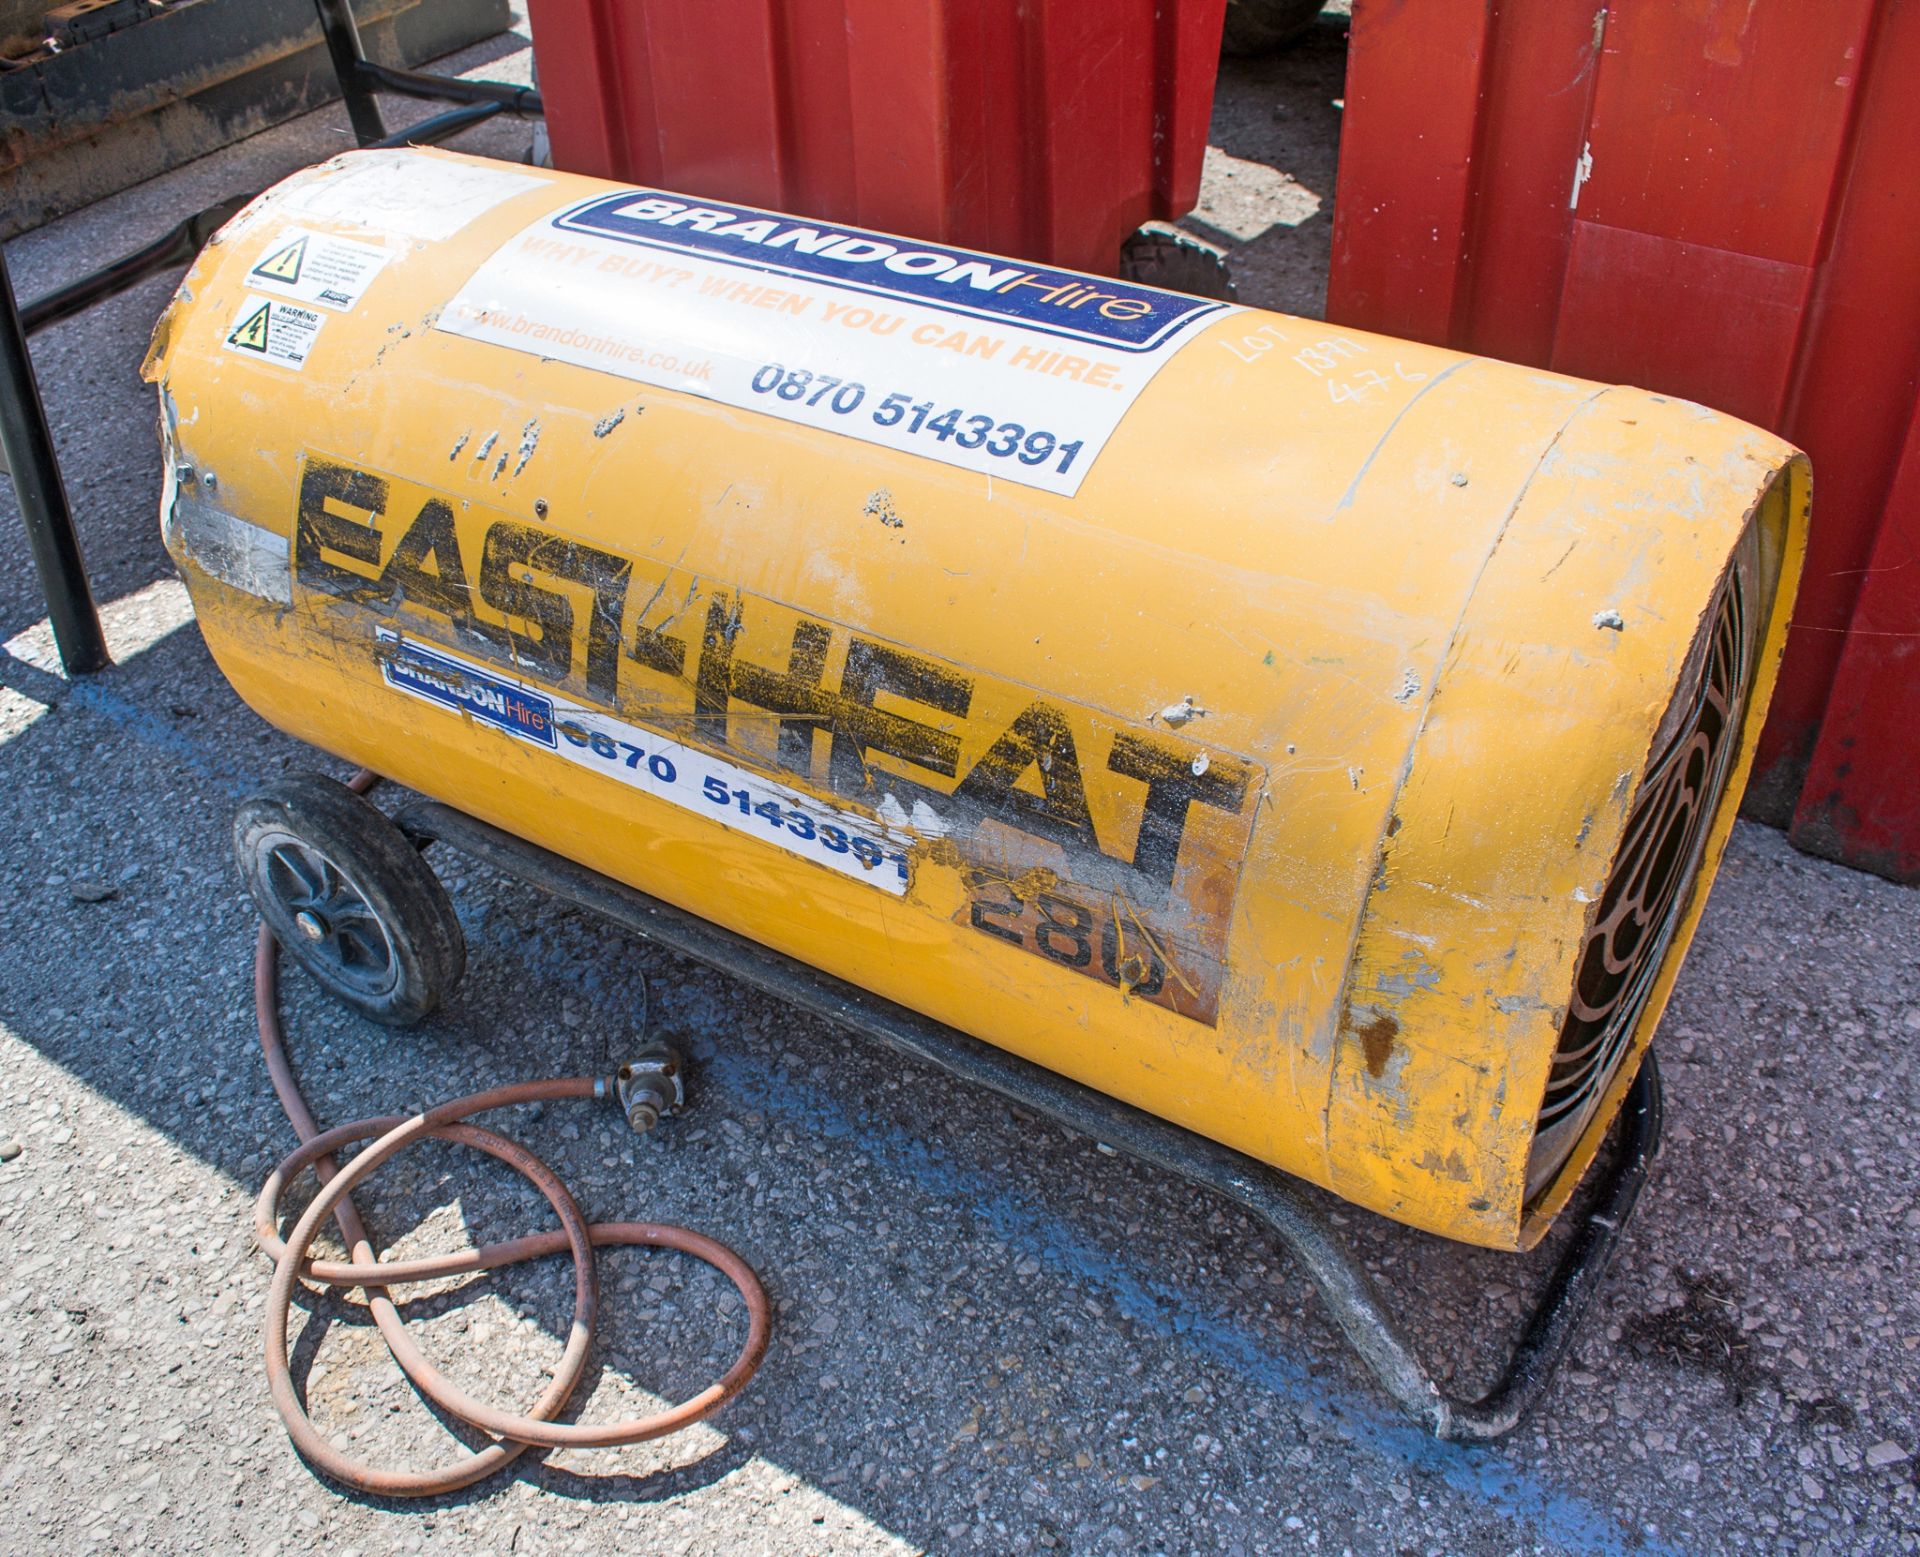 Easi Heat 280 gas fired space heater